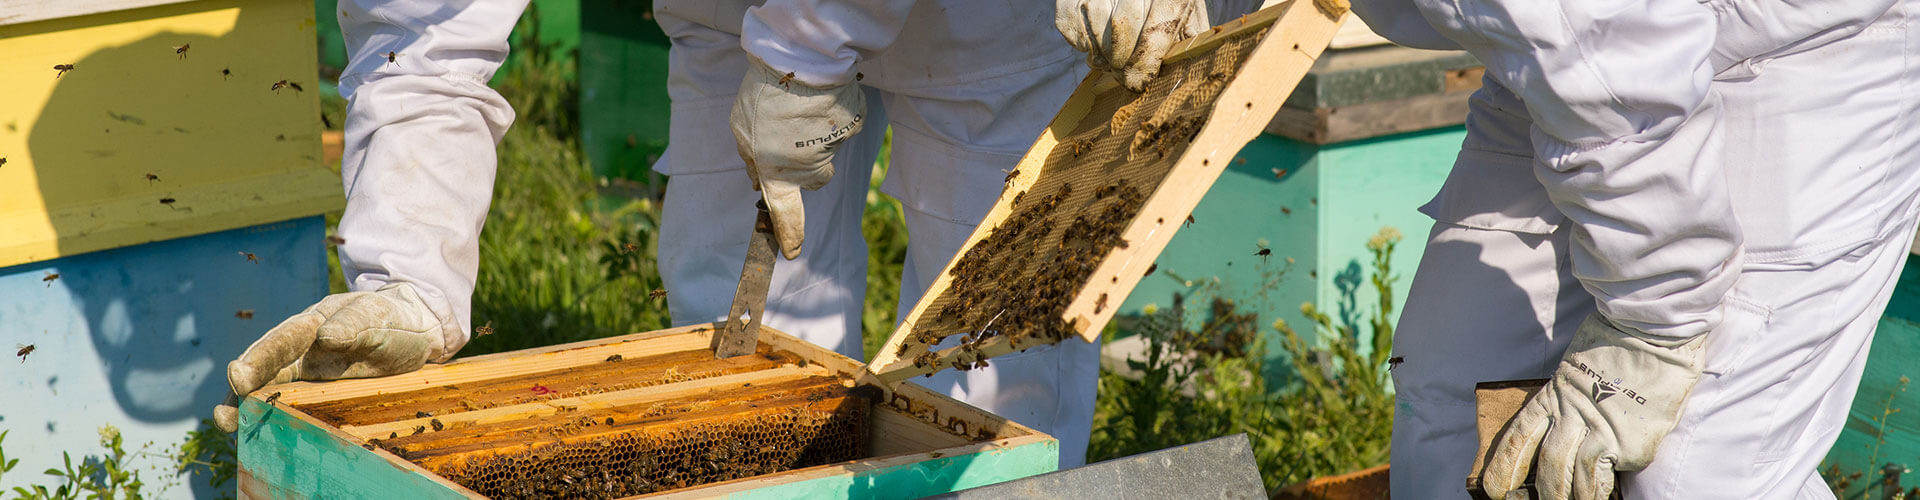 Mira Mesa Bee Removal, Bee Hive Removal and Honey Bee Removal